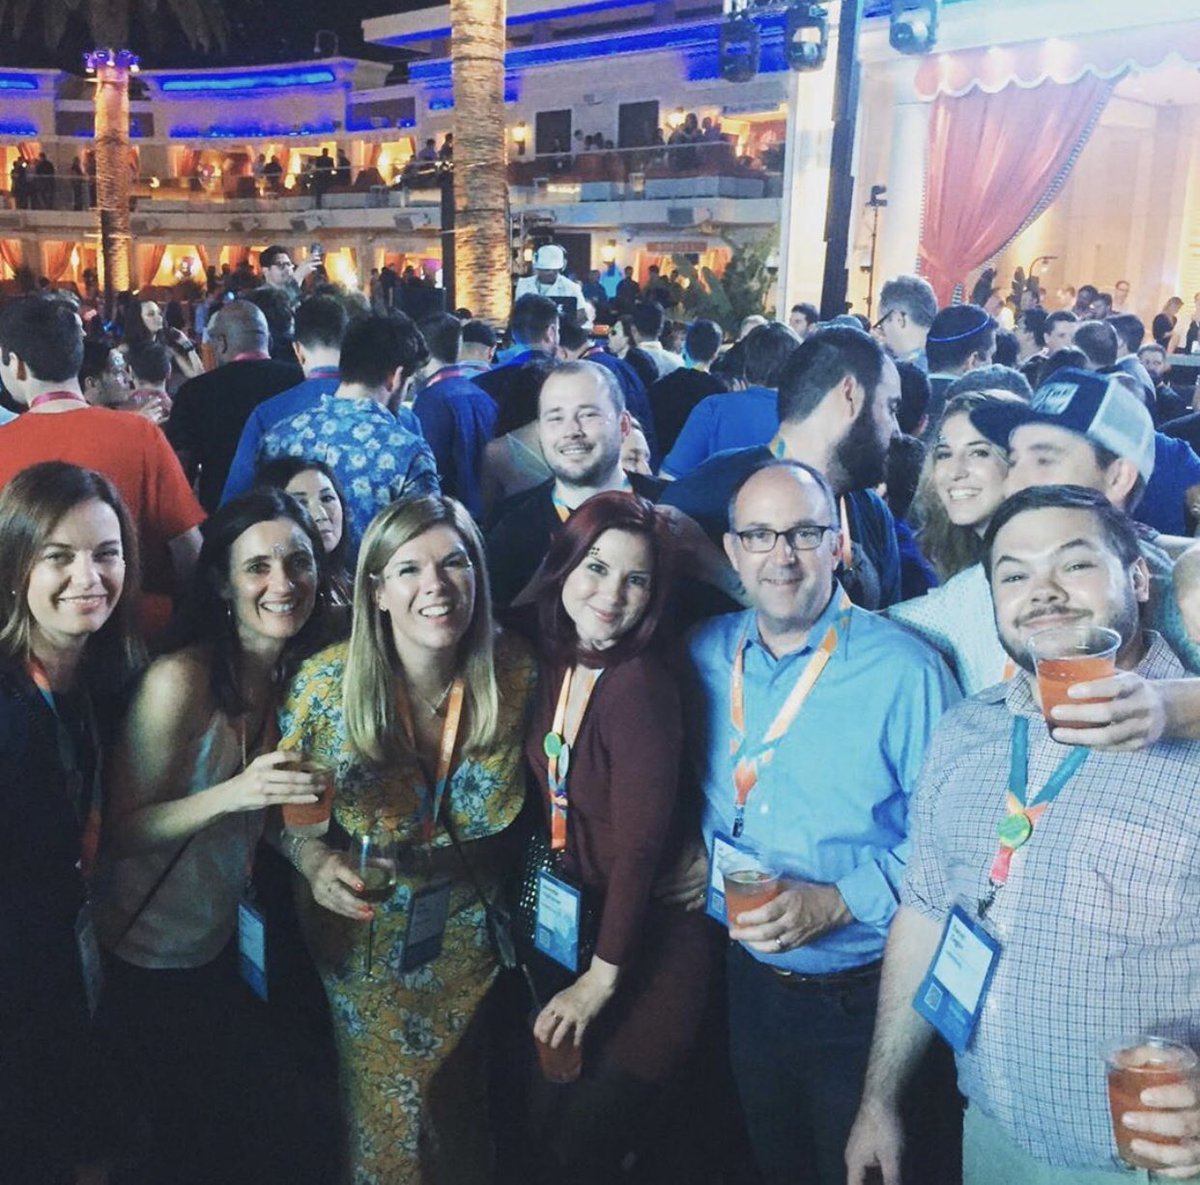 MaiWoolverton: Sad we’re not in Vegas with the #magentoimagine family, but at least we can tune in for digital #adobesummit! https://t.co/UijnZJuPFf